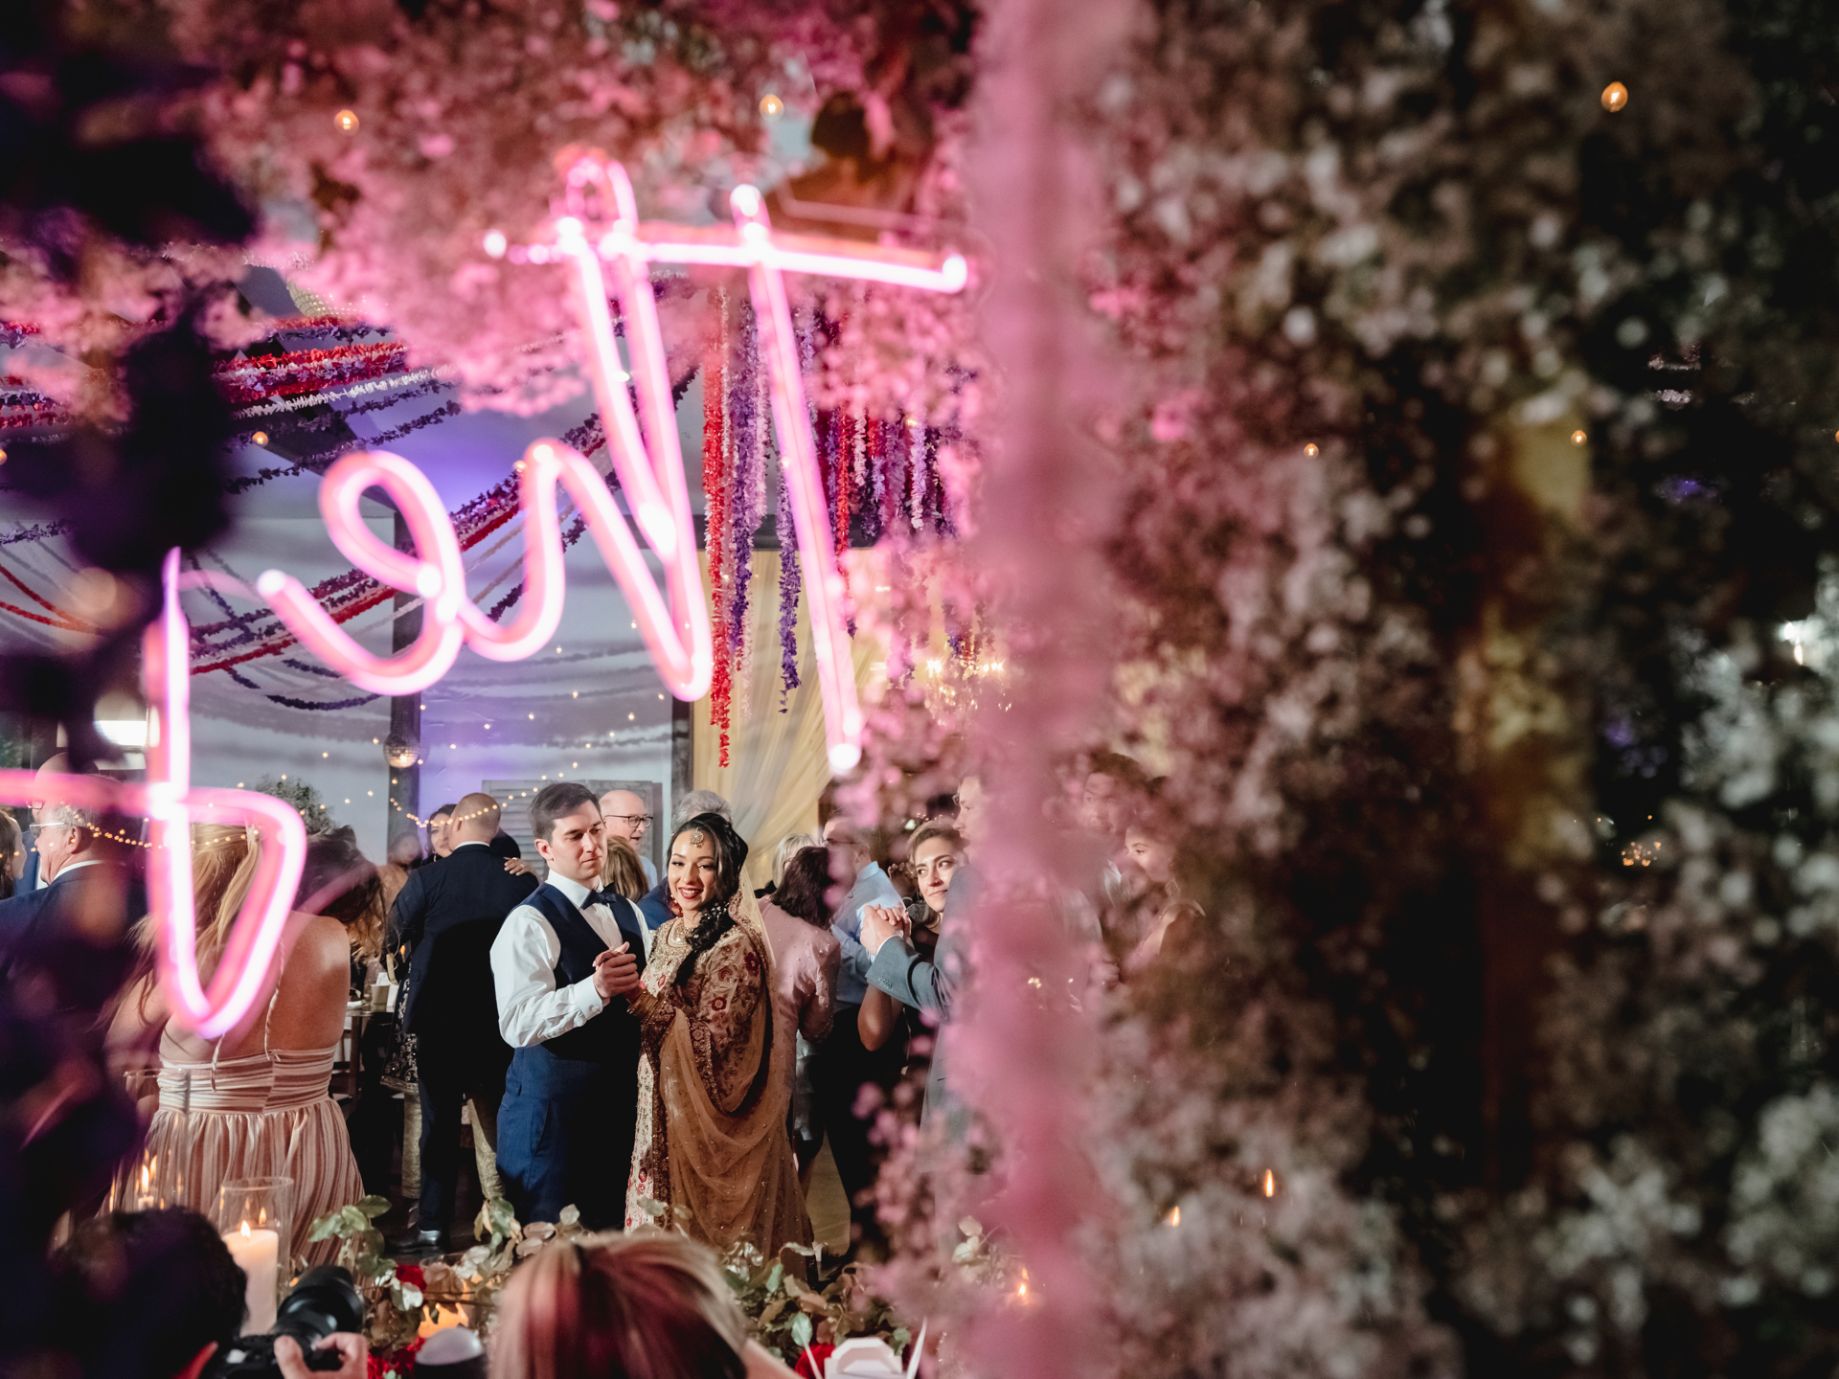 Brightly colored florals in pink, red and purple with a pink neon light is surrounding bride and groom dancing during their reception.